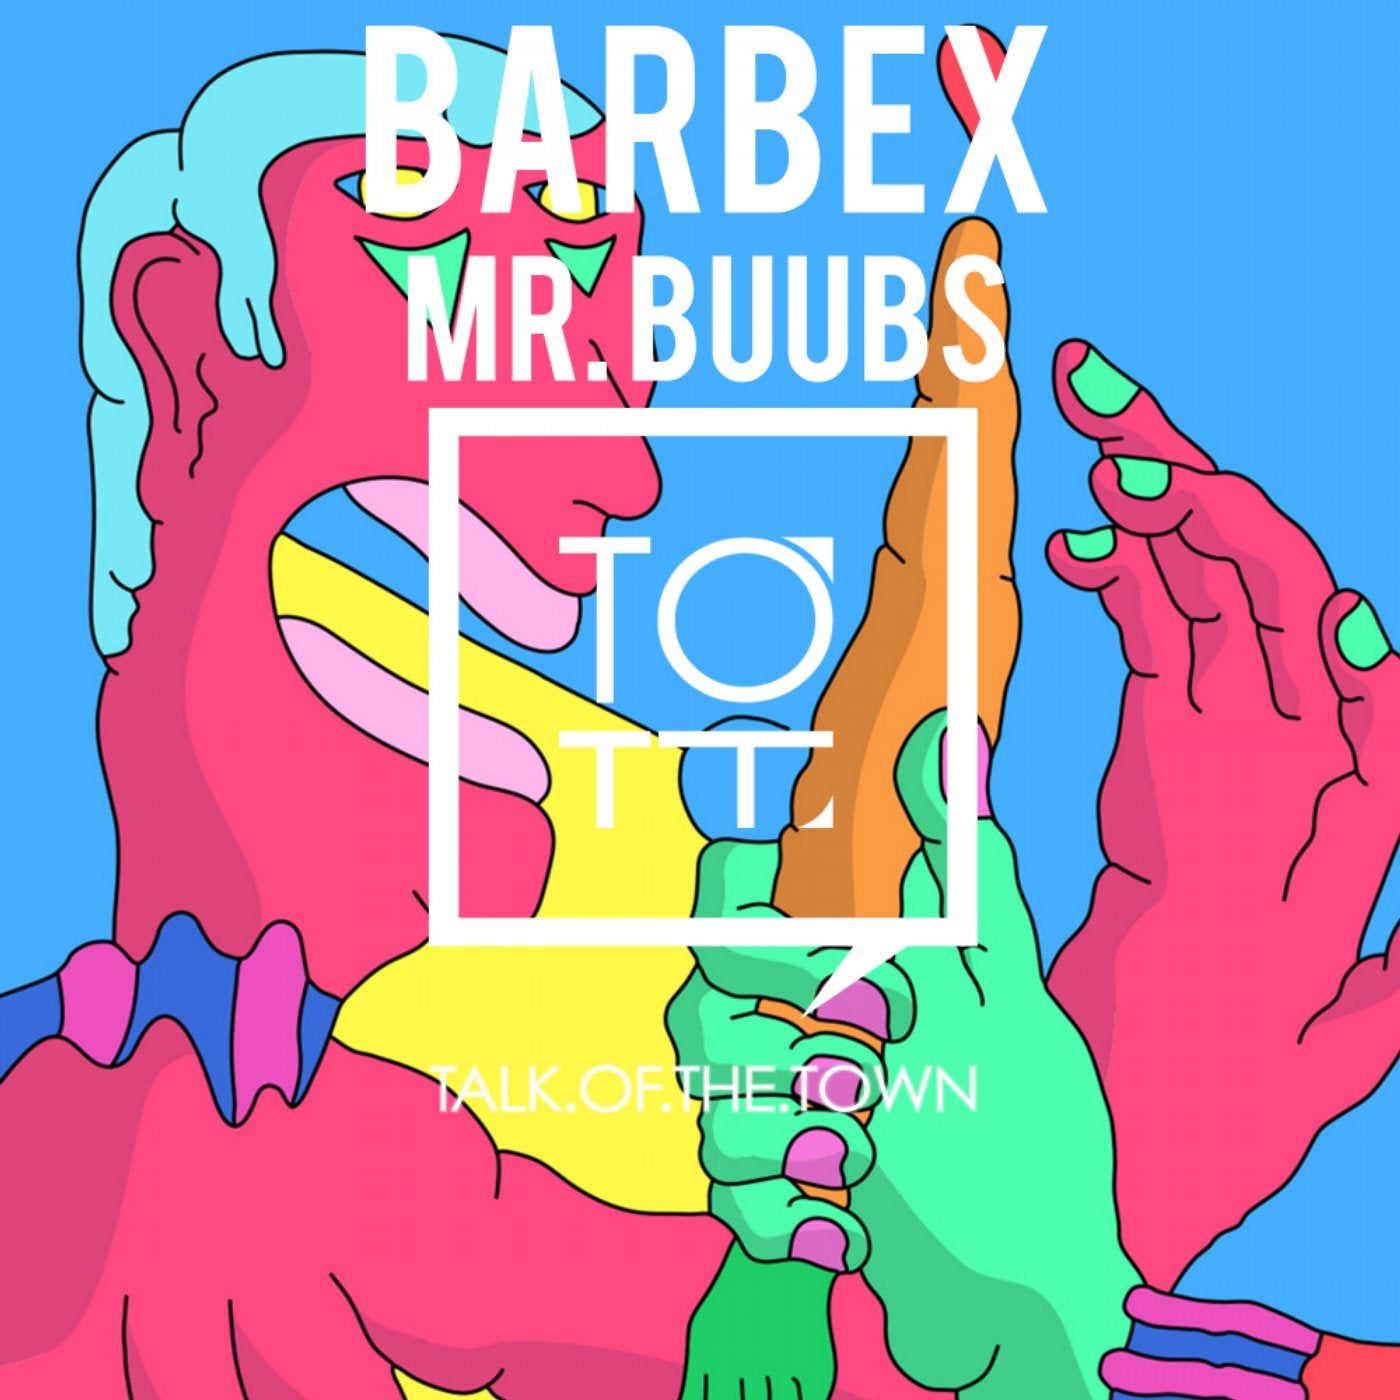 Mr. Buubs